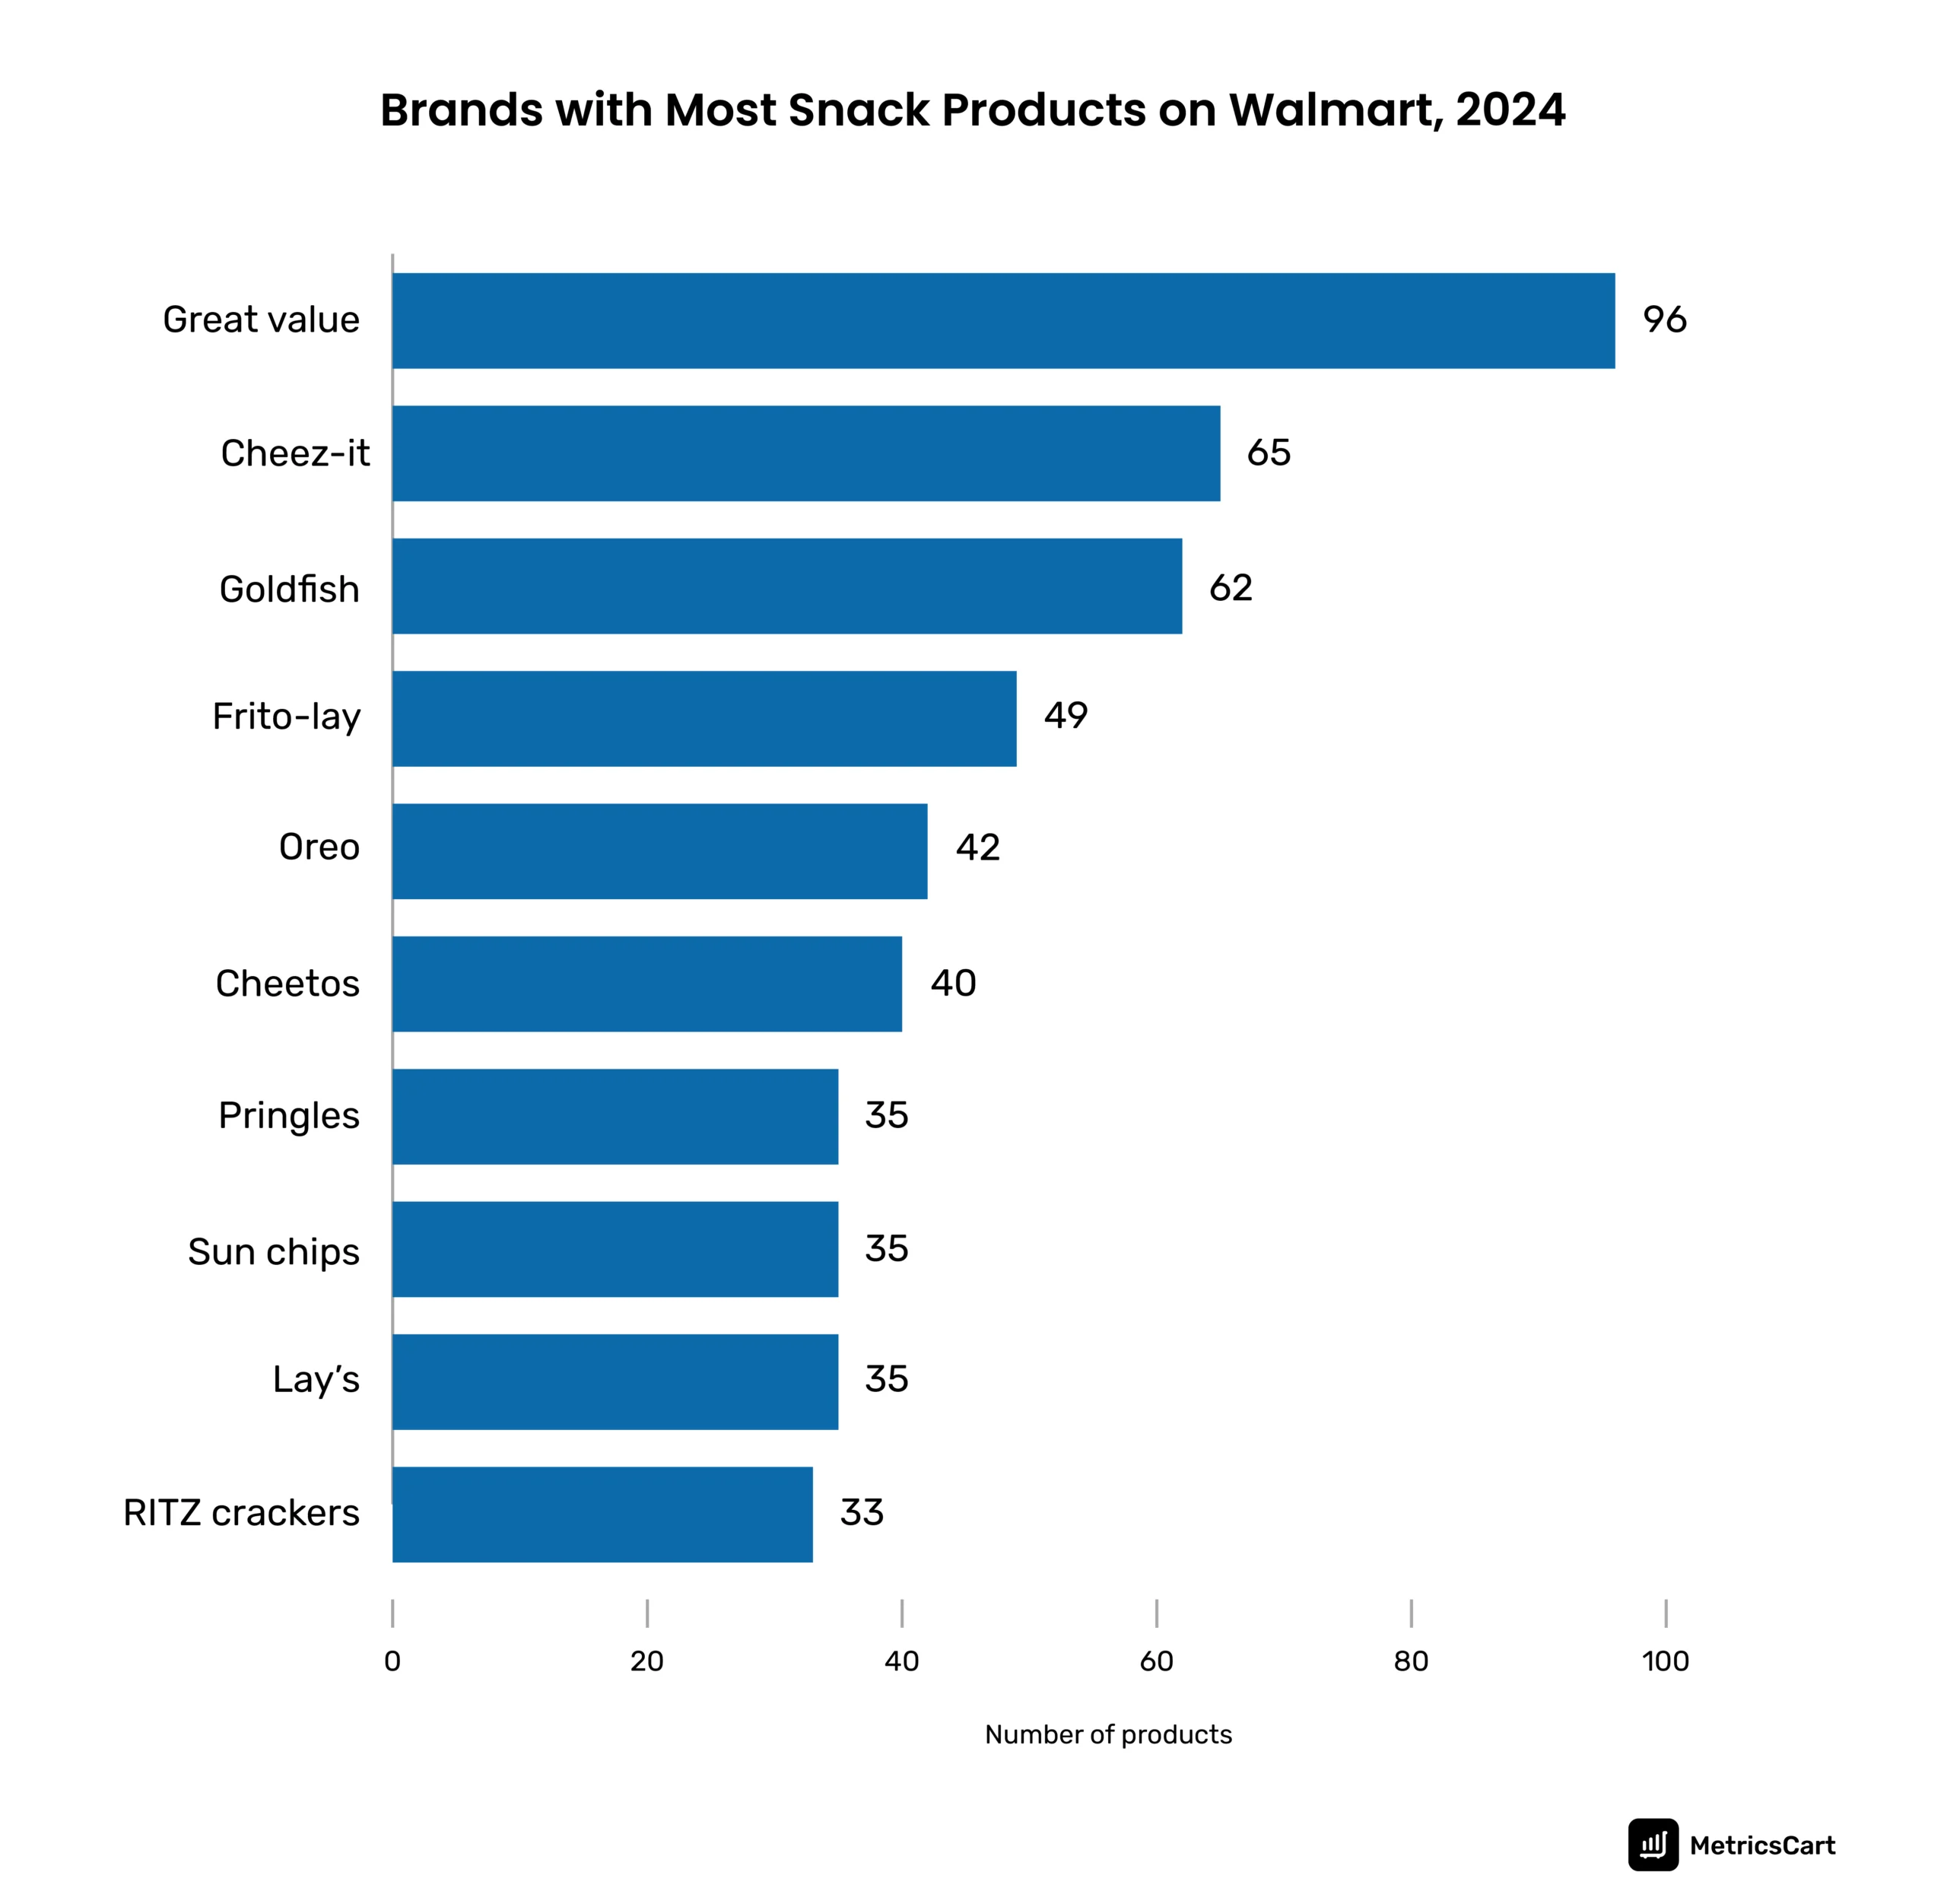 The graph shows the top brands with the highest number of snacks at Walmart